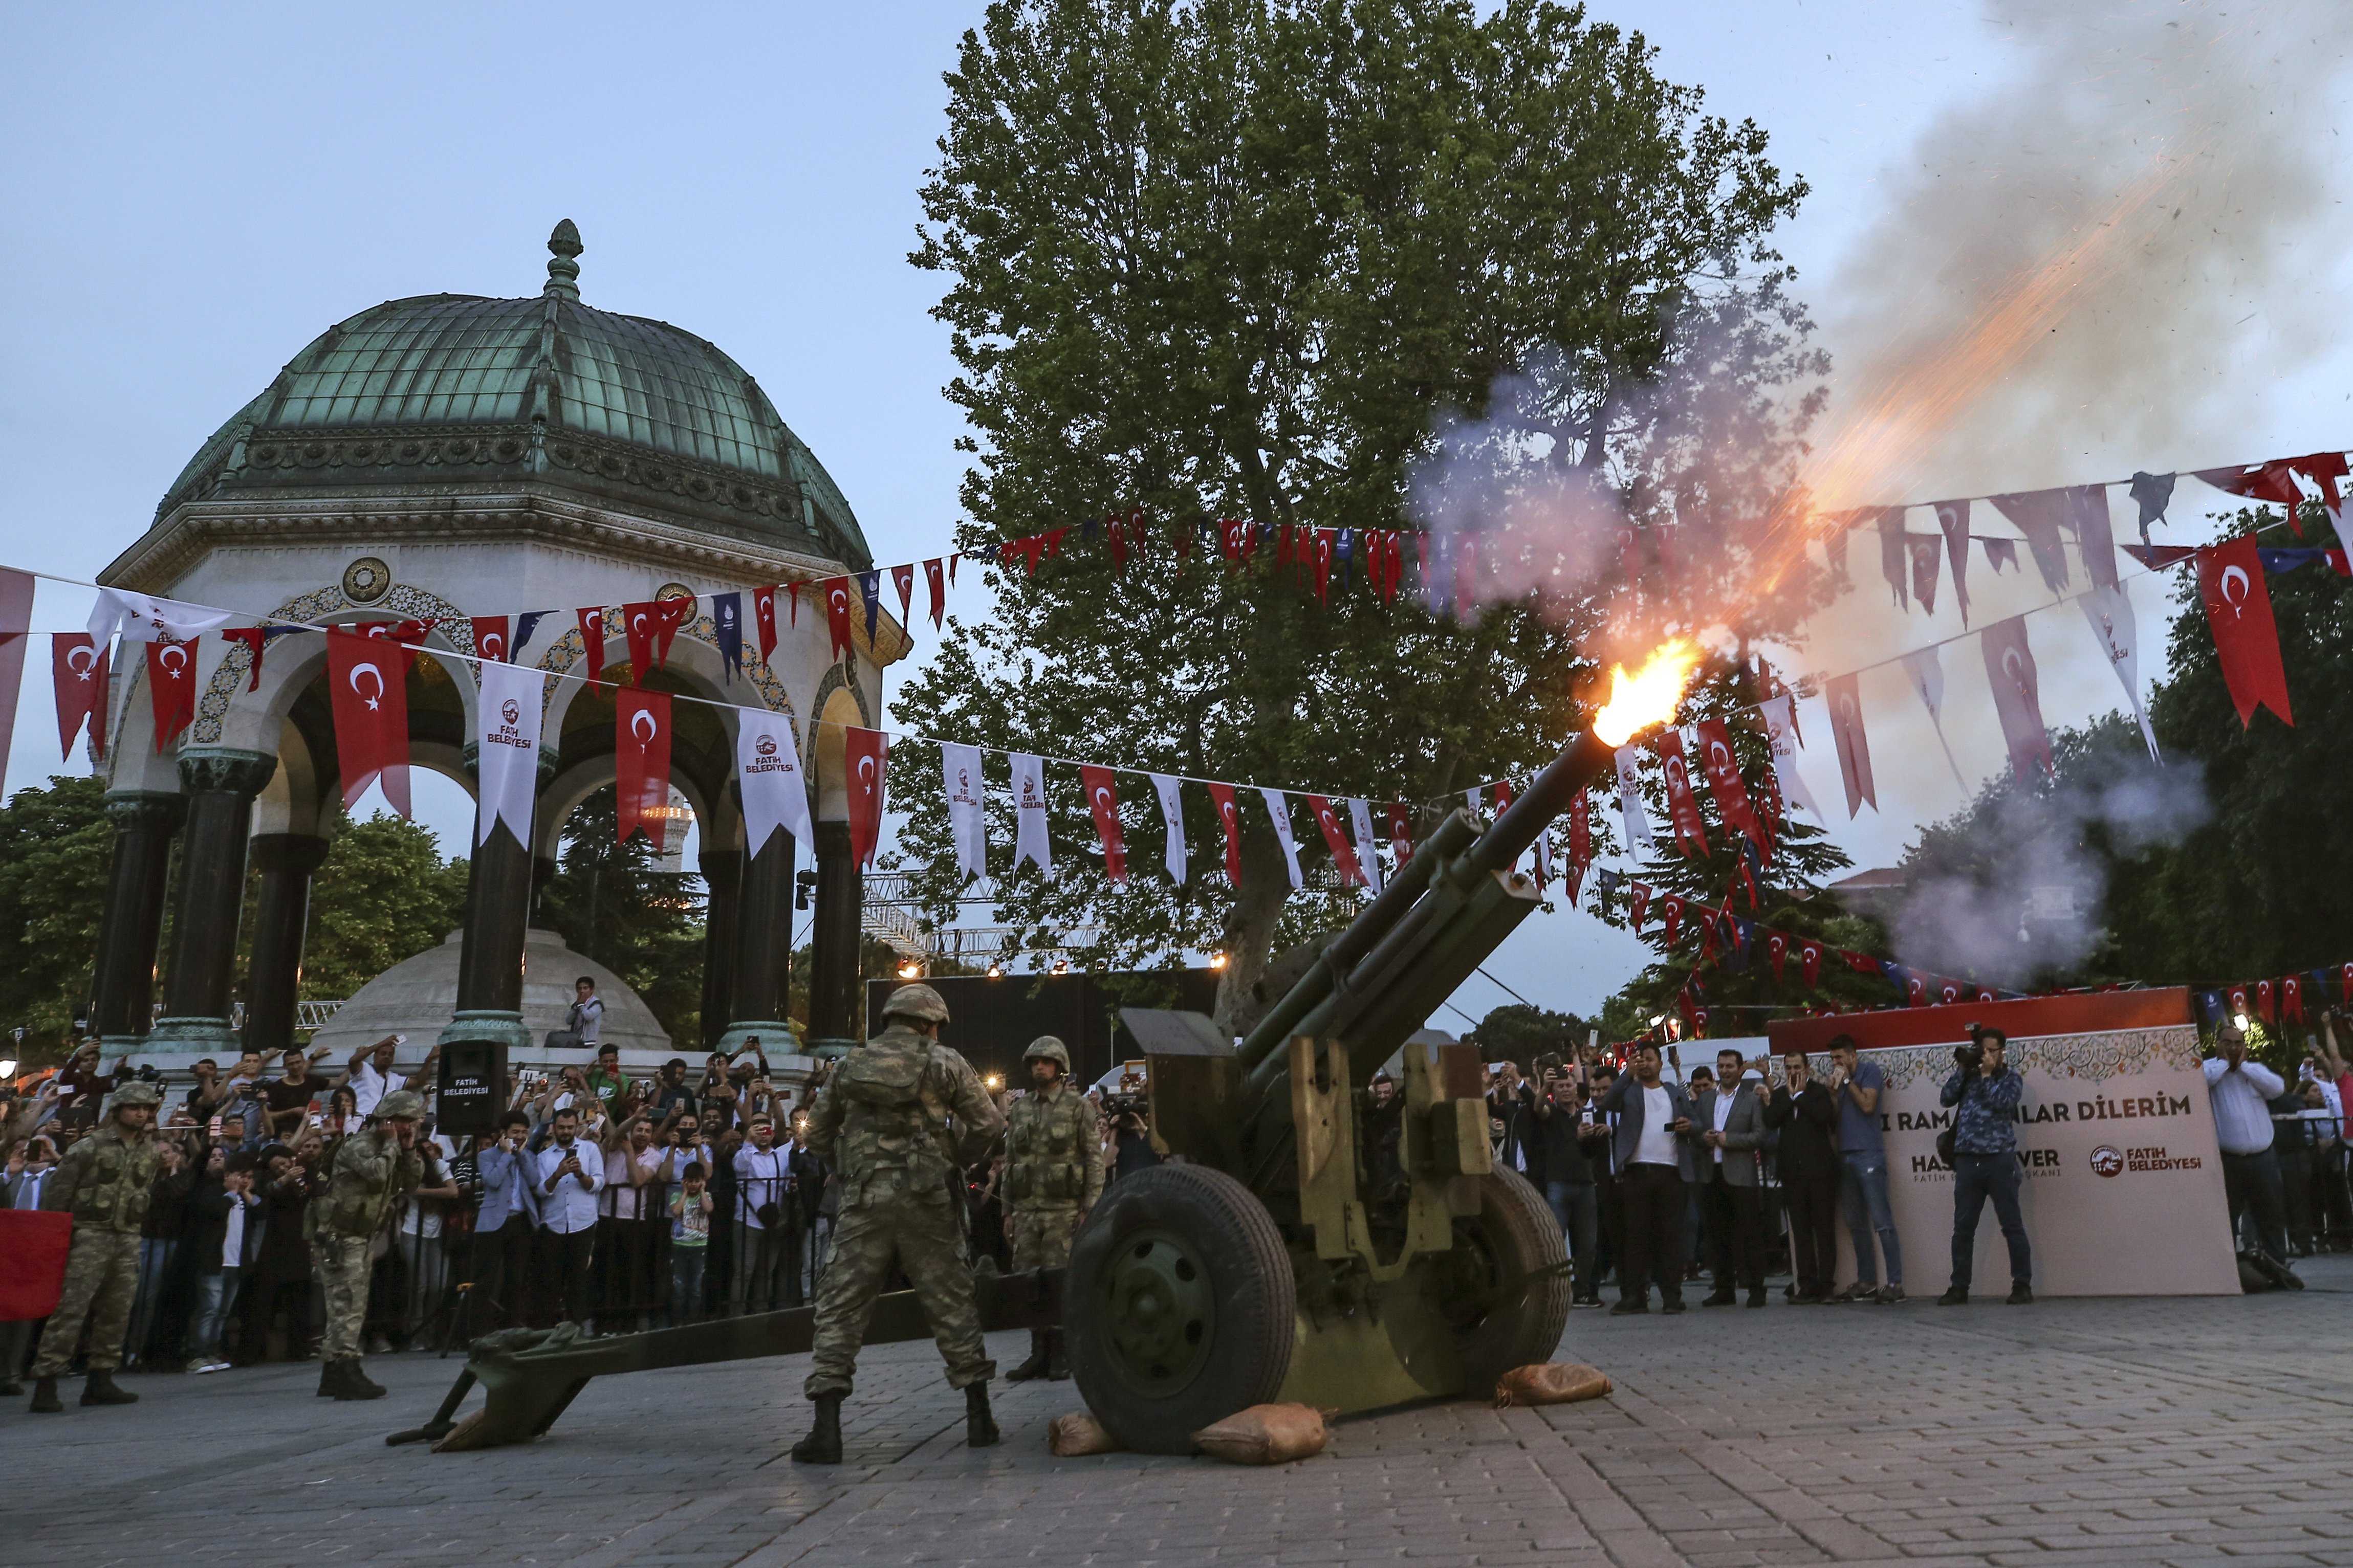 A Turkish army artillery unit marks the end of fasting, in the historic Sultanahmet district of Istanbul, Wednesday, May 16, 2018 on the first day of the fasting month of Ramadan. Muslims throughout the world are marking Ramadan - a month of fasting during which the observants abstain from food, drink and other pleasures from sunrise to sunset. After an obligatory sunset prayer, a large feast known as 'iftar' is shared with family and friends. (AP Photo/Emrah Gurel)